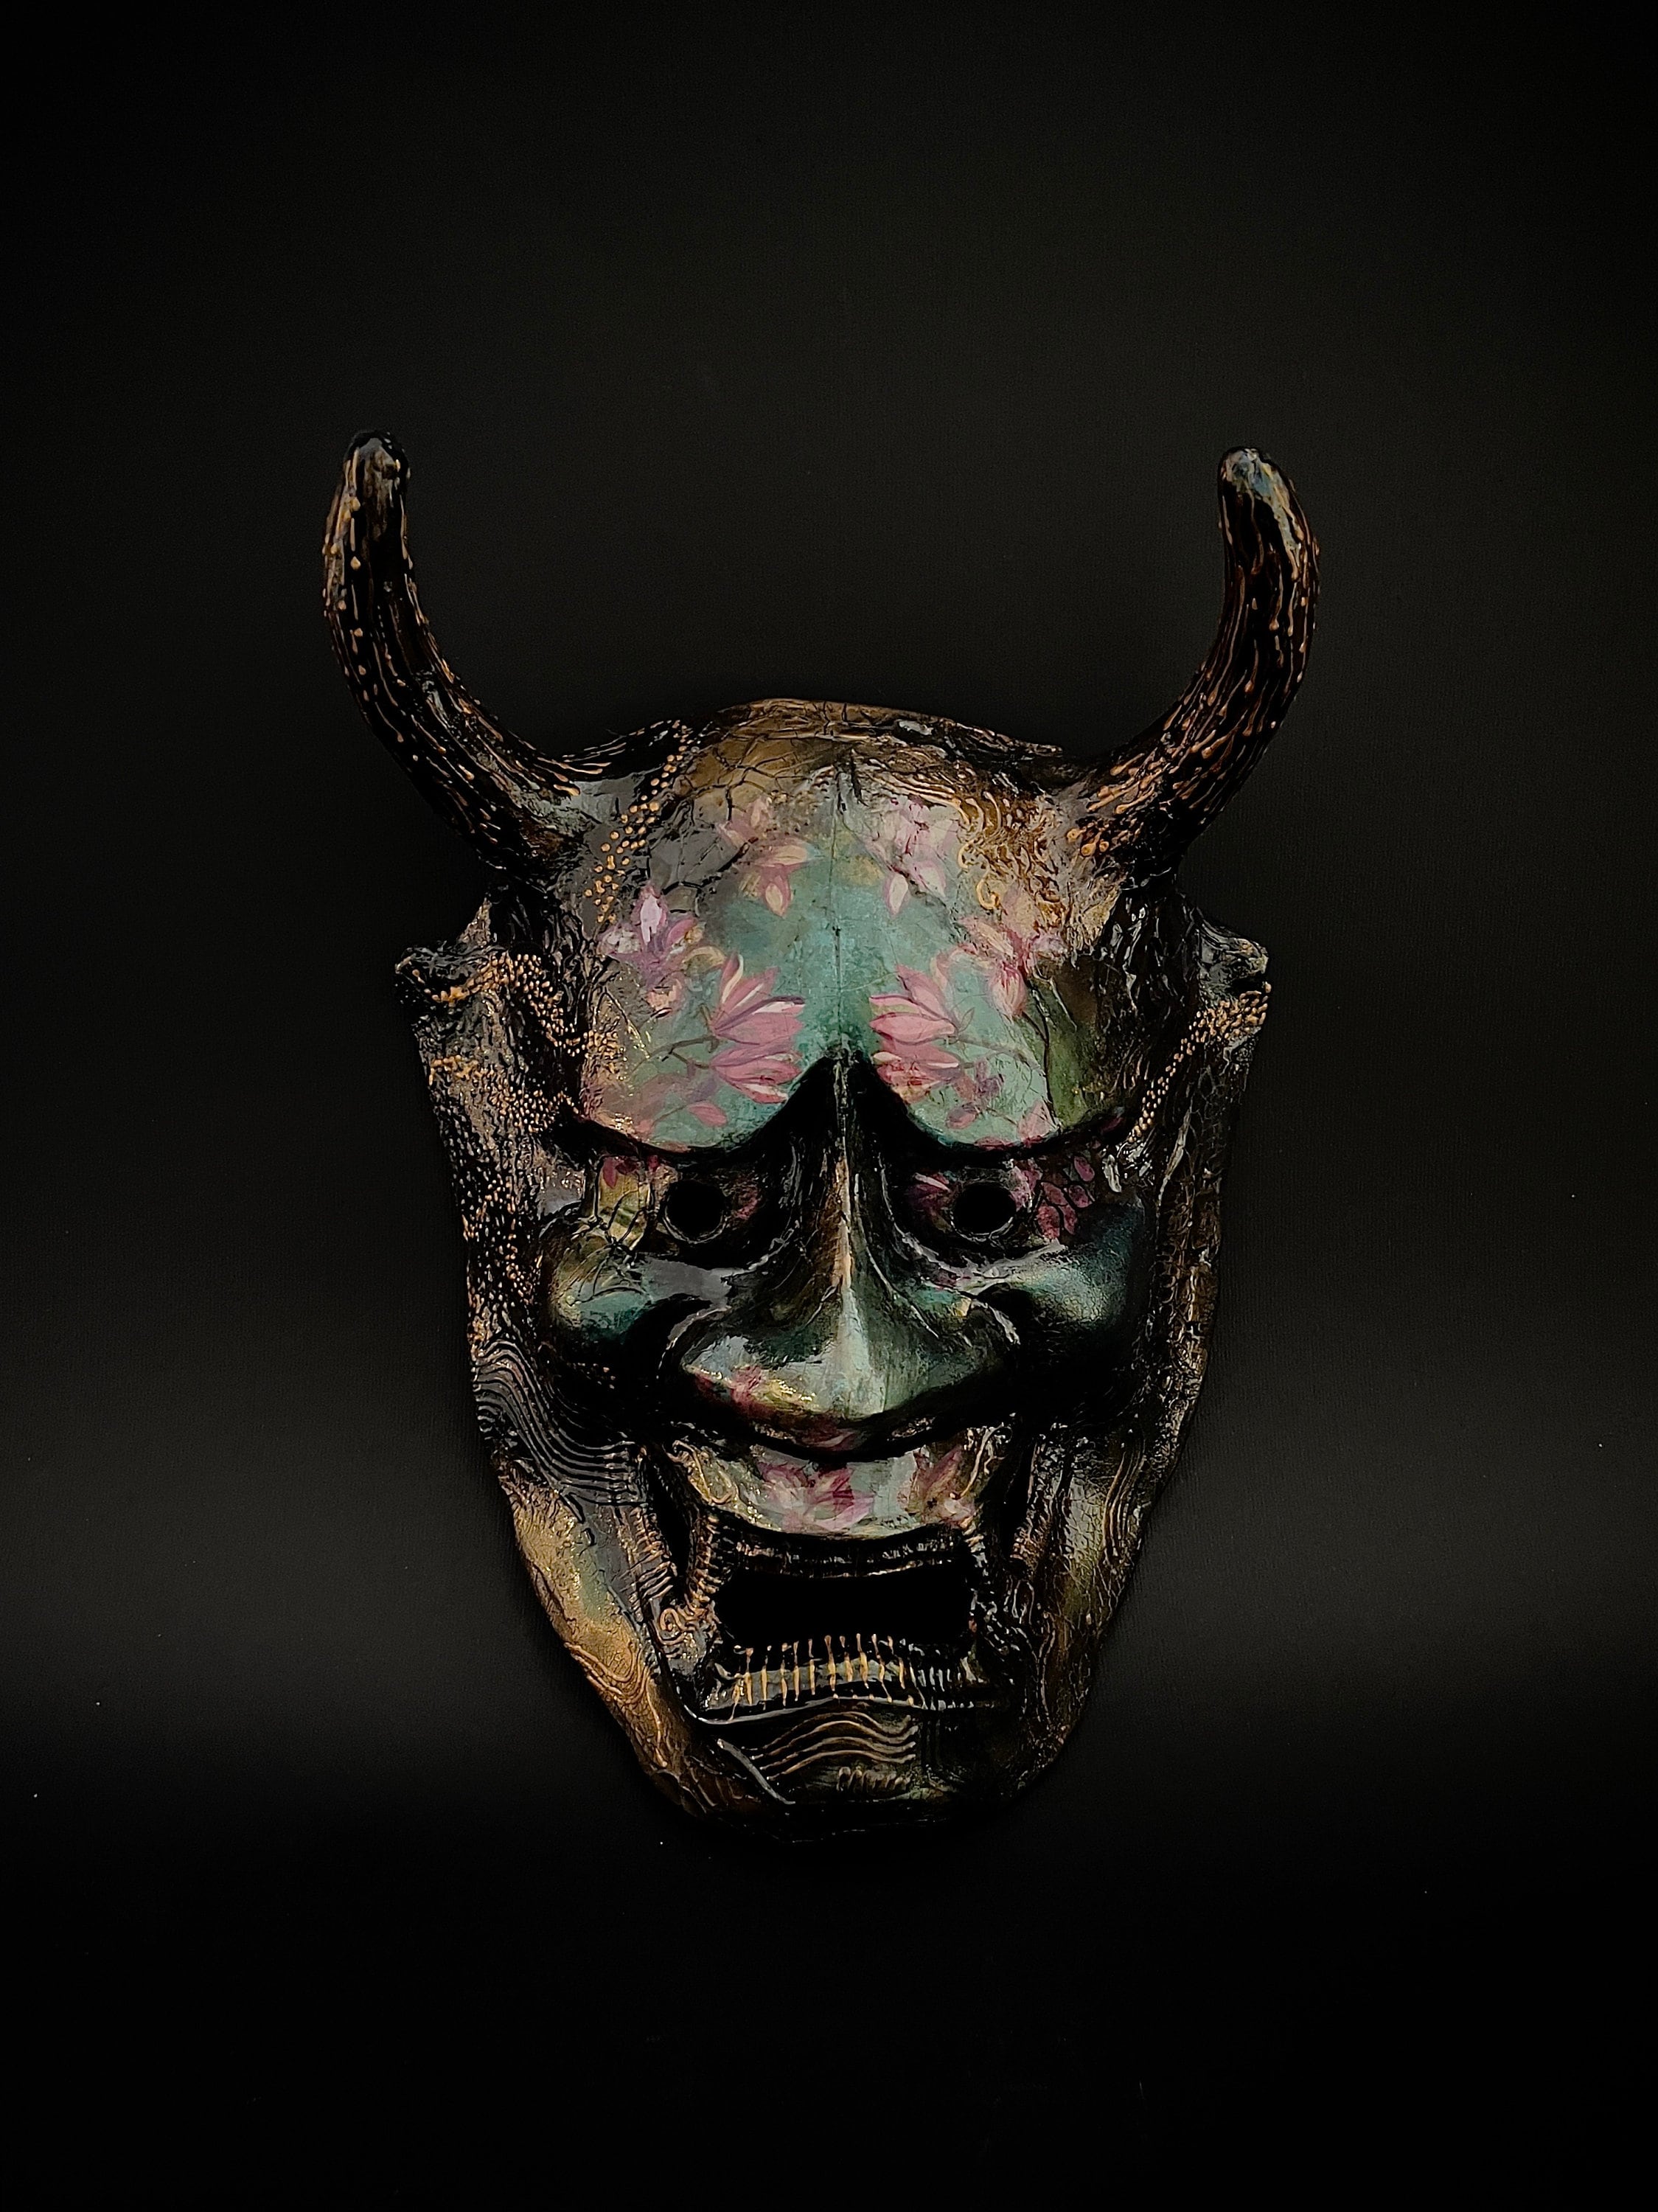 Handcrafted Cyberpunk Oni Mask - Limited Stock Available